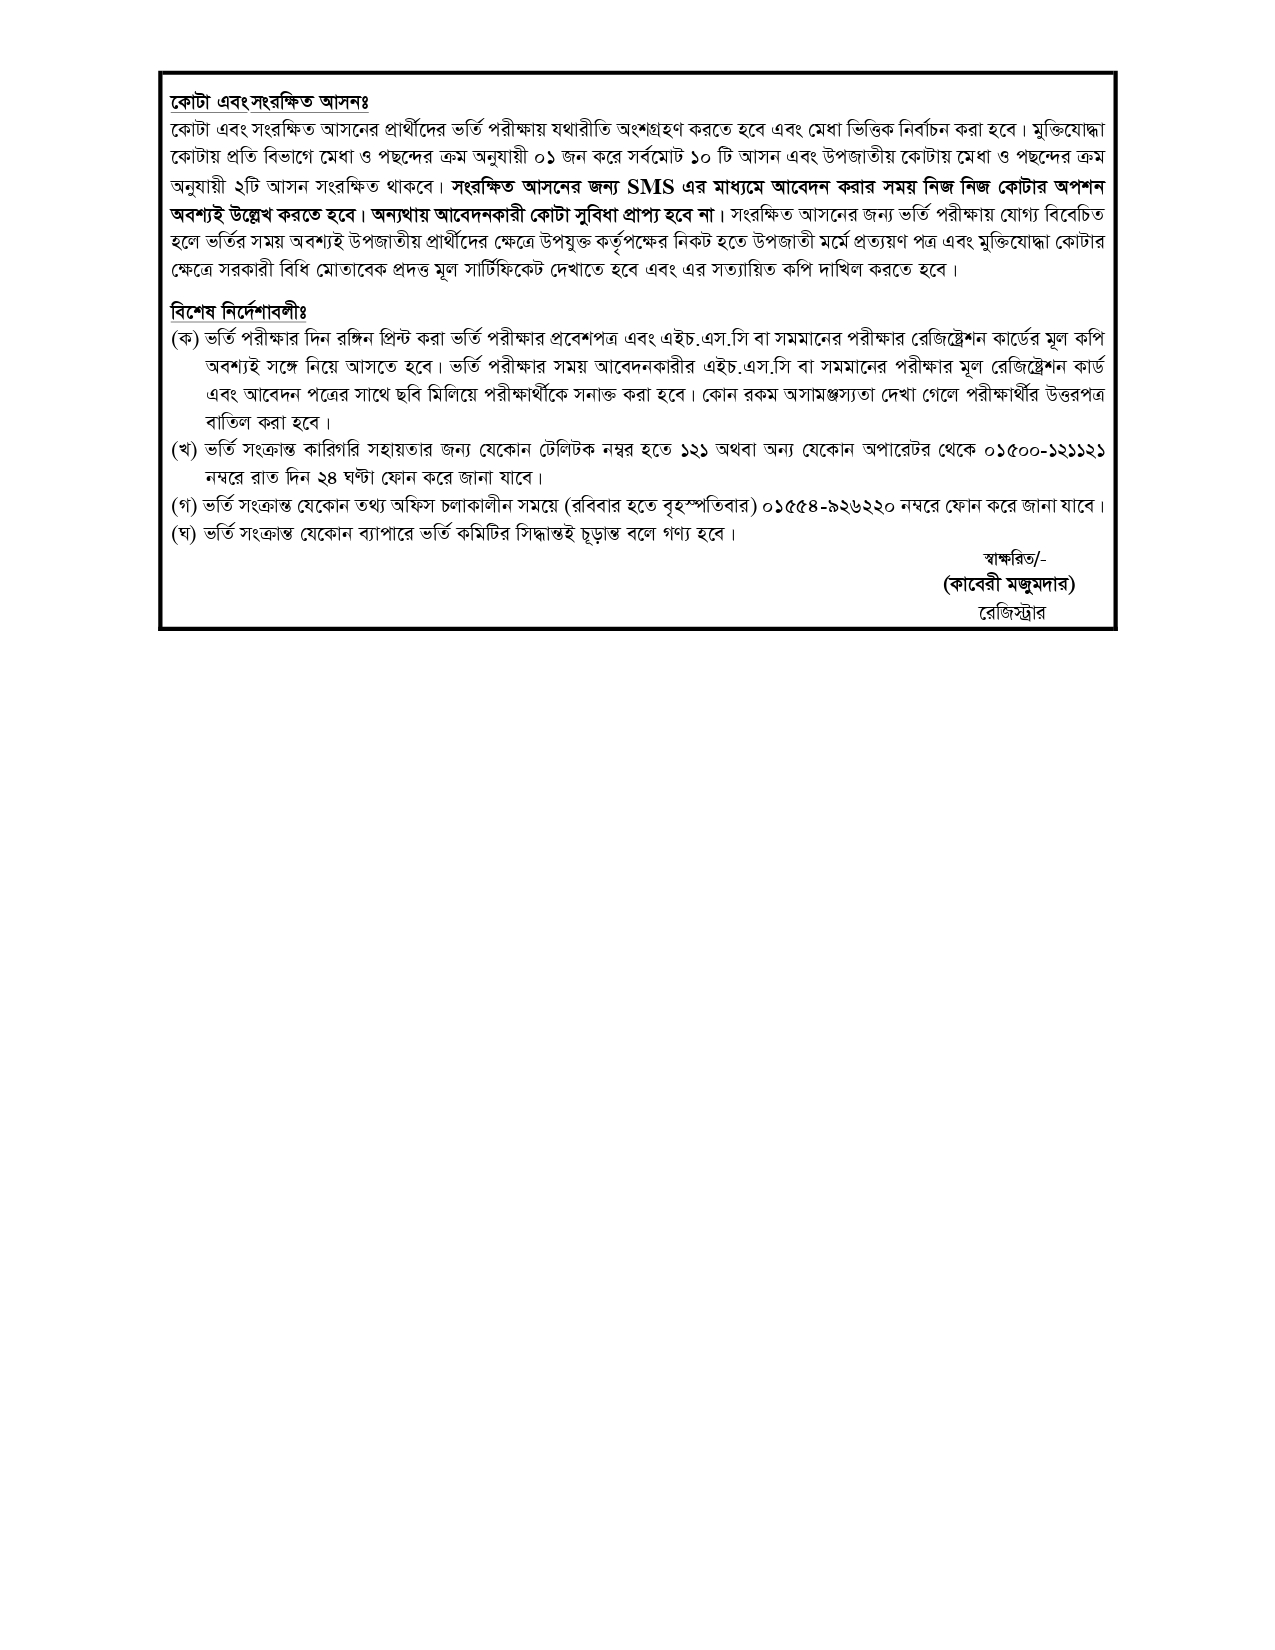 BSc admission circular 2023 2024 page 0004